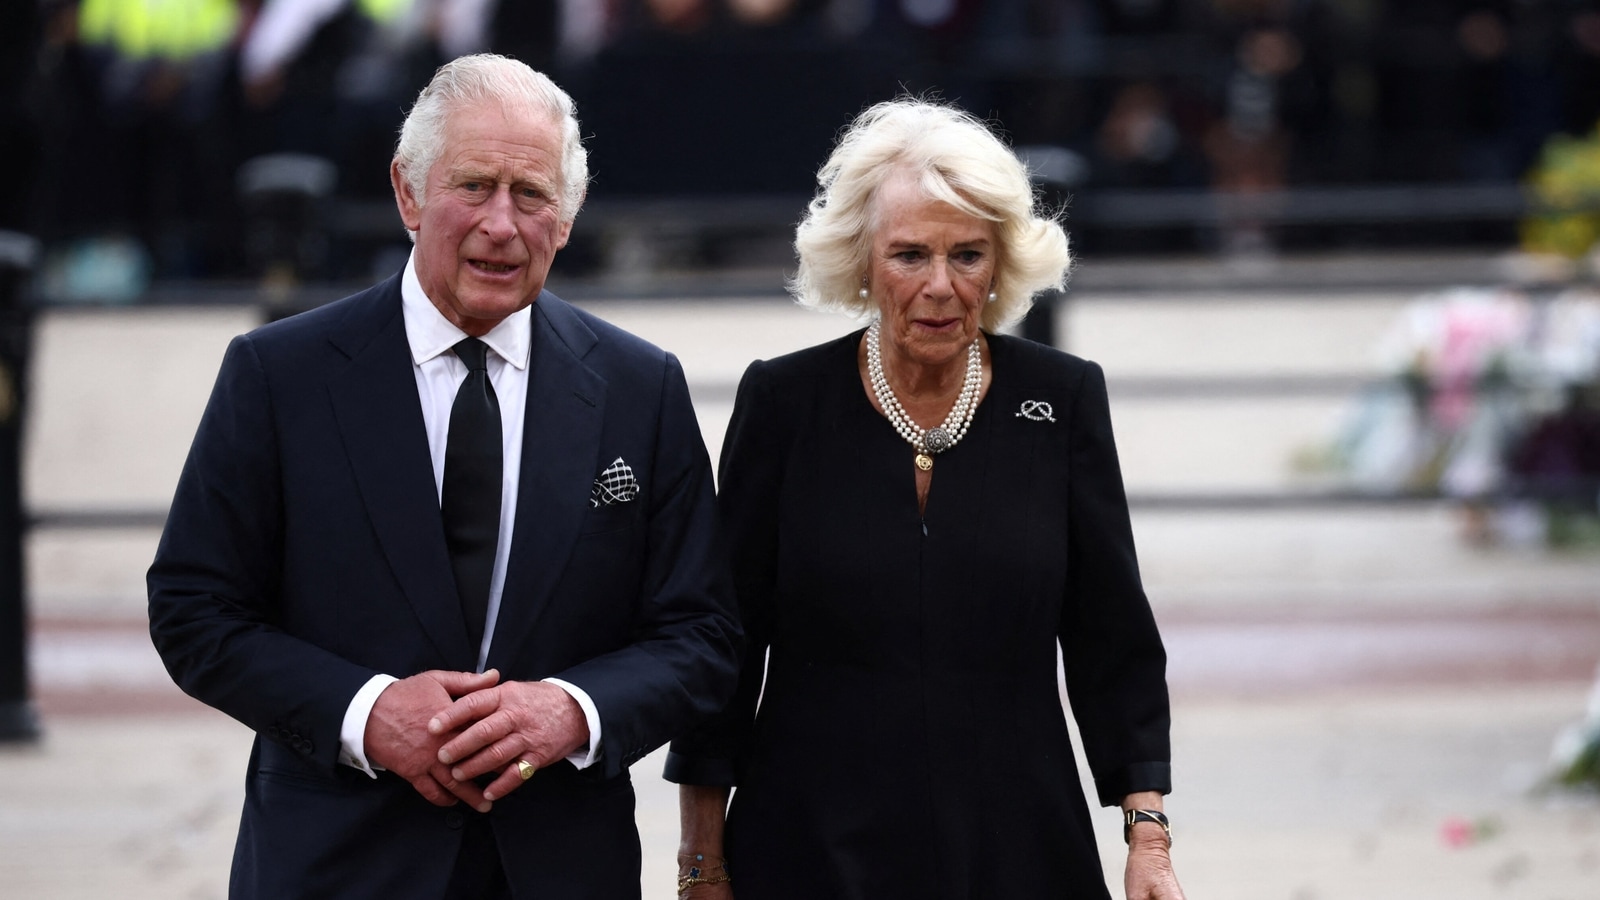 The frenzy Charles and Camilla's relationship encountered | World News ...